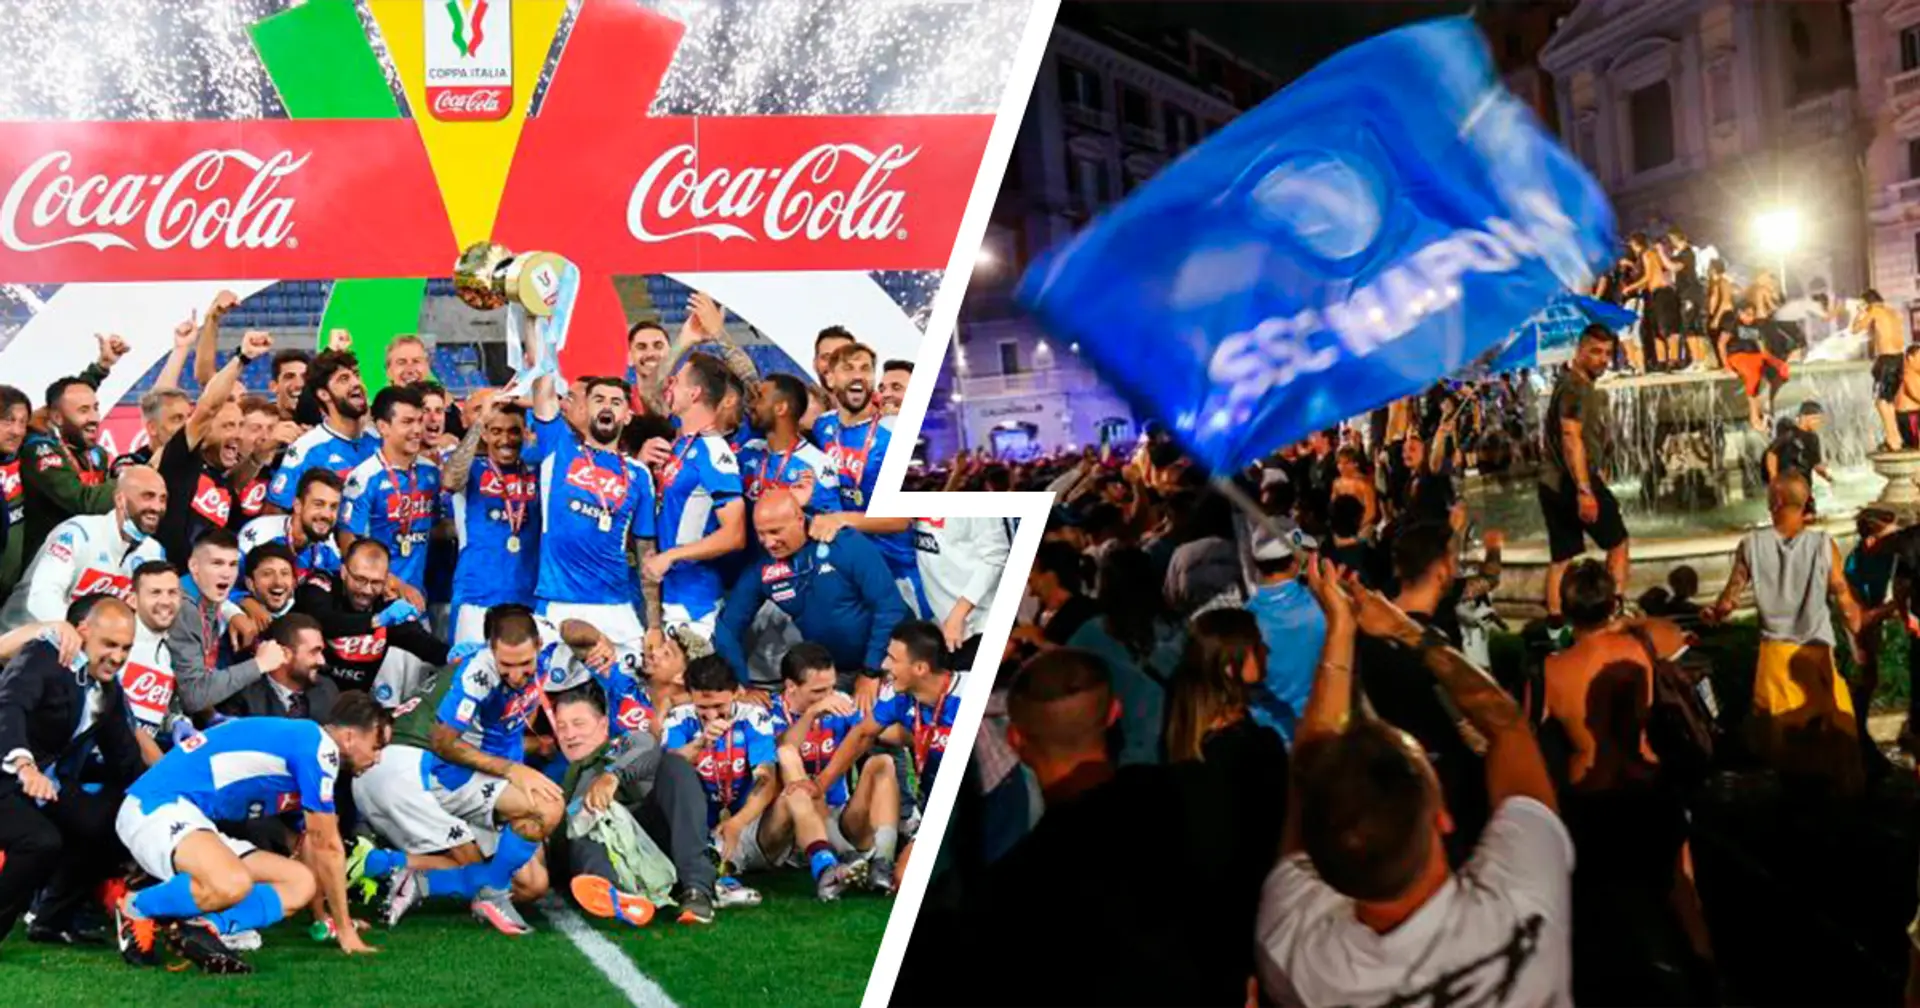 Napoli give Liverpool yet another title celebrations scenario; their fans show perfect example of what Reds' supporters should not do